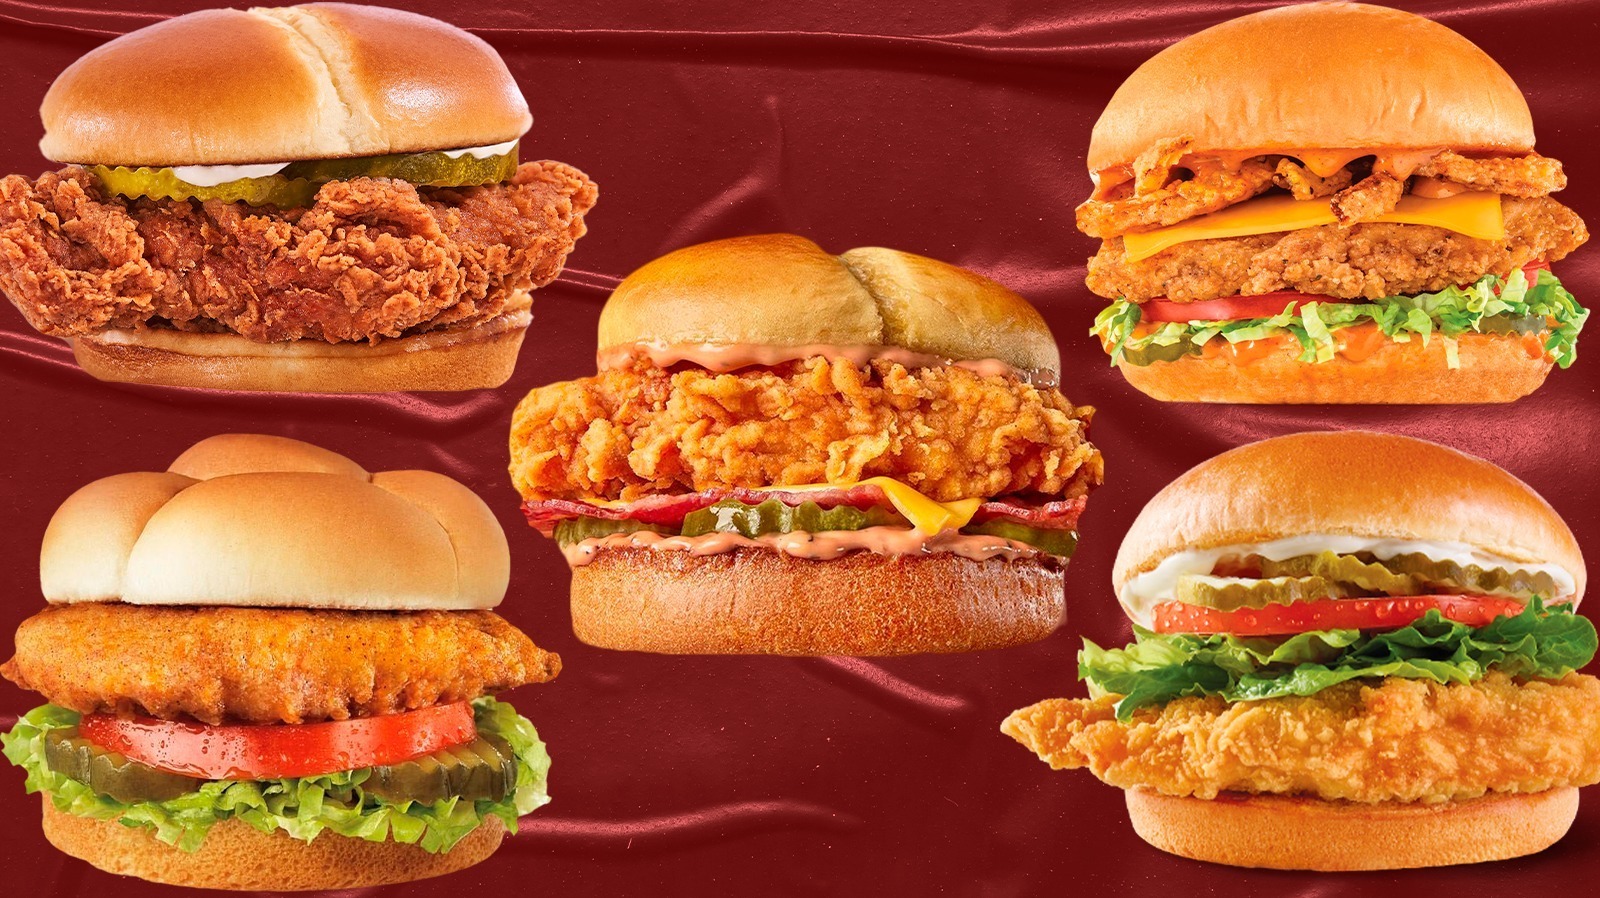 https://www.tastingtable.com/img/gallery/19-fast-food-chicken-sandwiches-ranked-worst-to-best/l-intro-1684938143.jpg